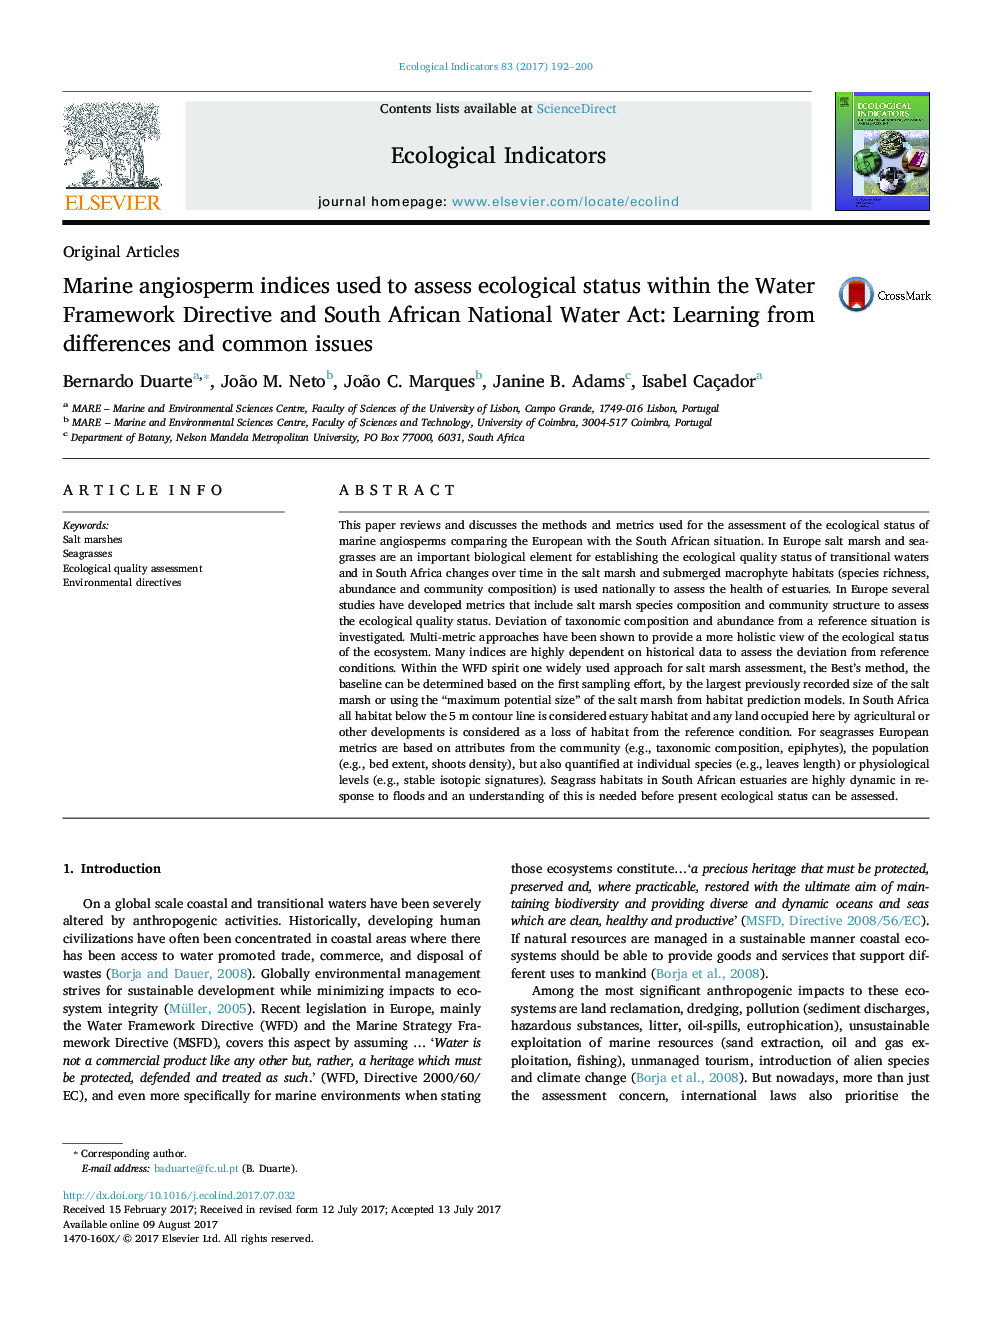 Original ArticlesMarine angiosperm indices used to assess ecological status within the Water Framework Directive and South African National Water Act: Learning from differences and common issues